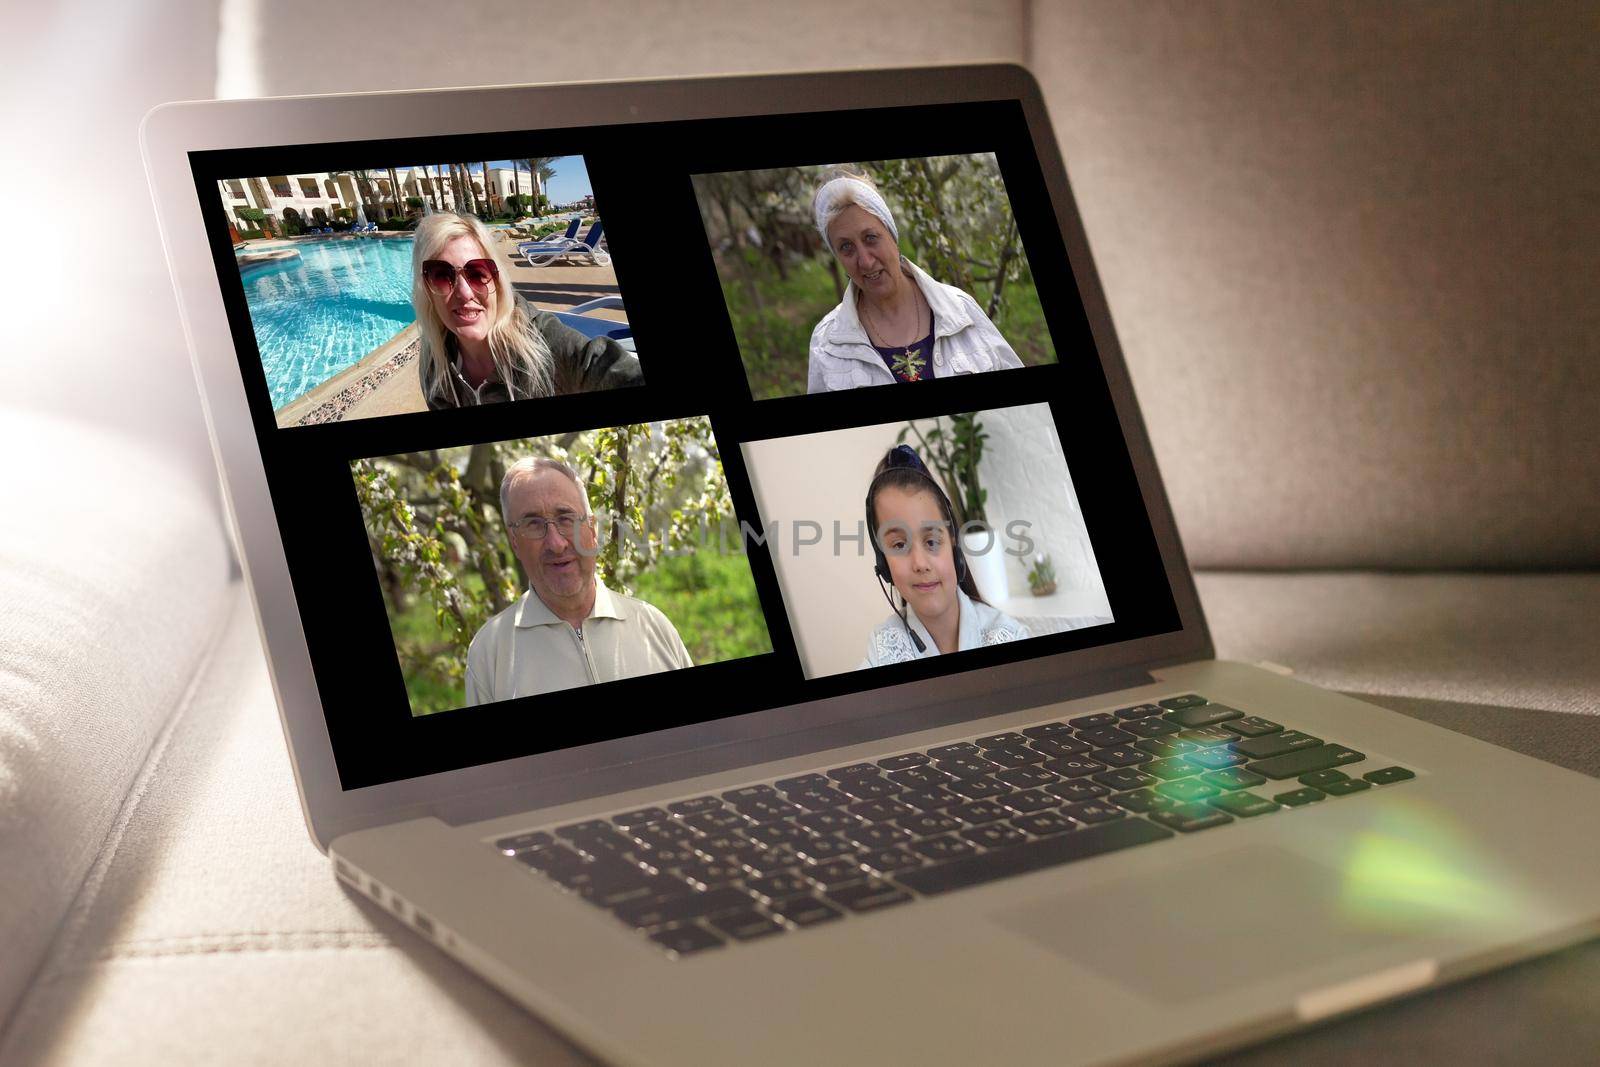 video call from home, screen, Webcam, communicate online.